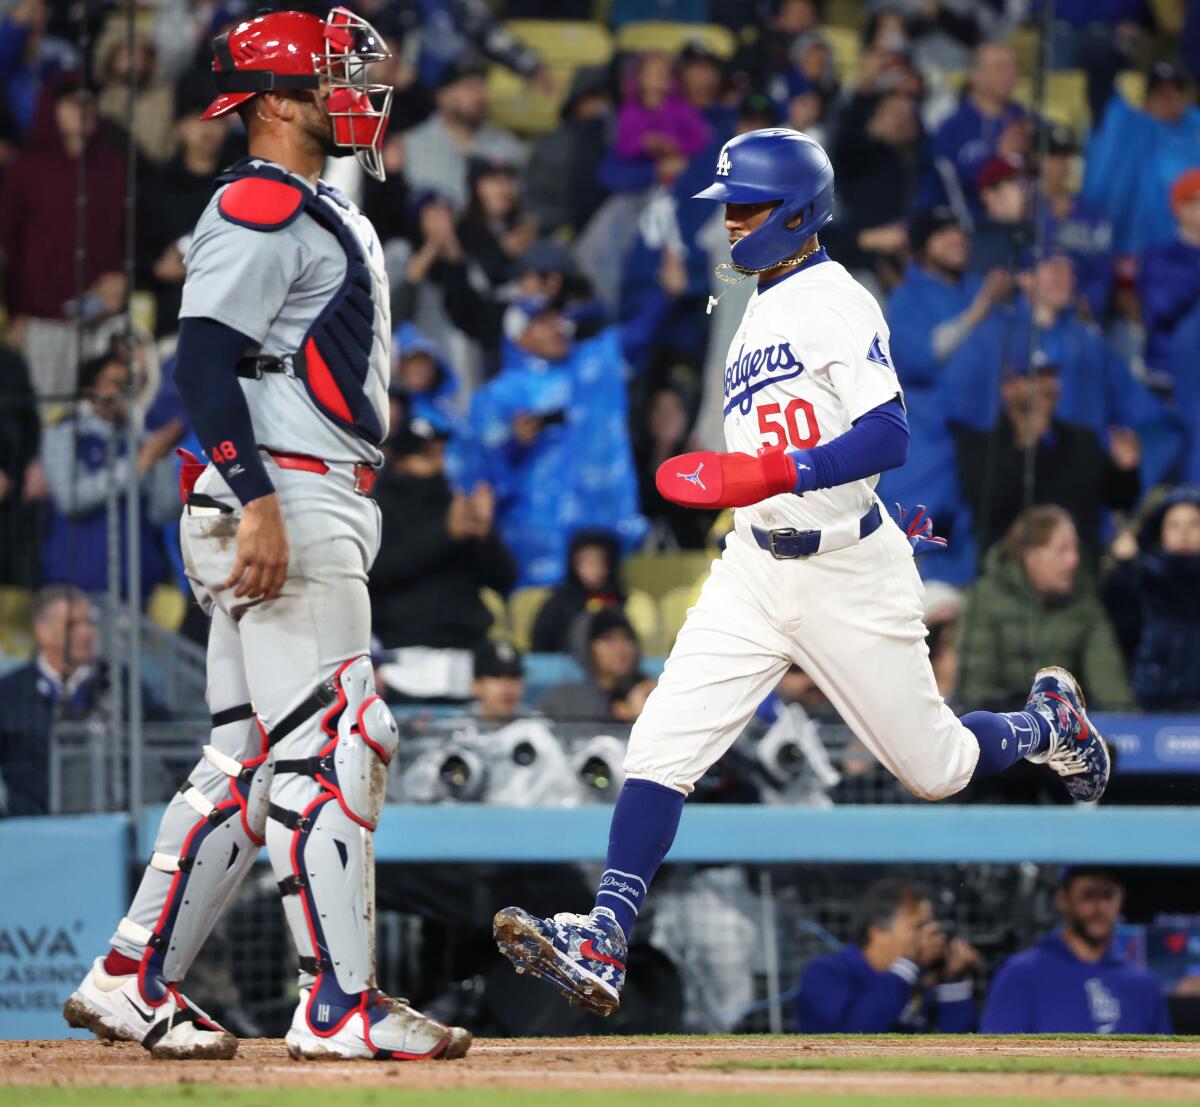 Dodgers baserunner Mookie Betts scores during the fifth inning against the Cardinals on Saturday.